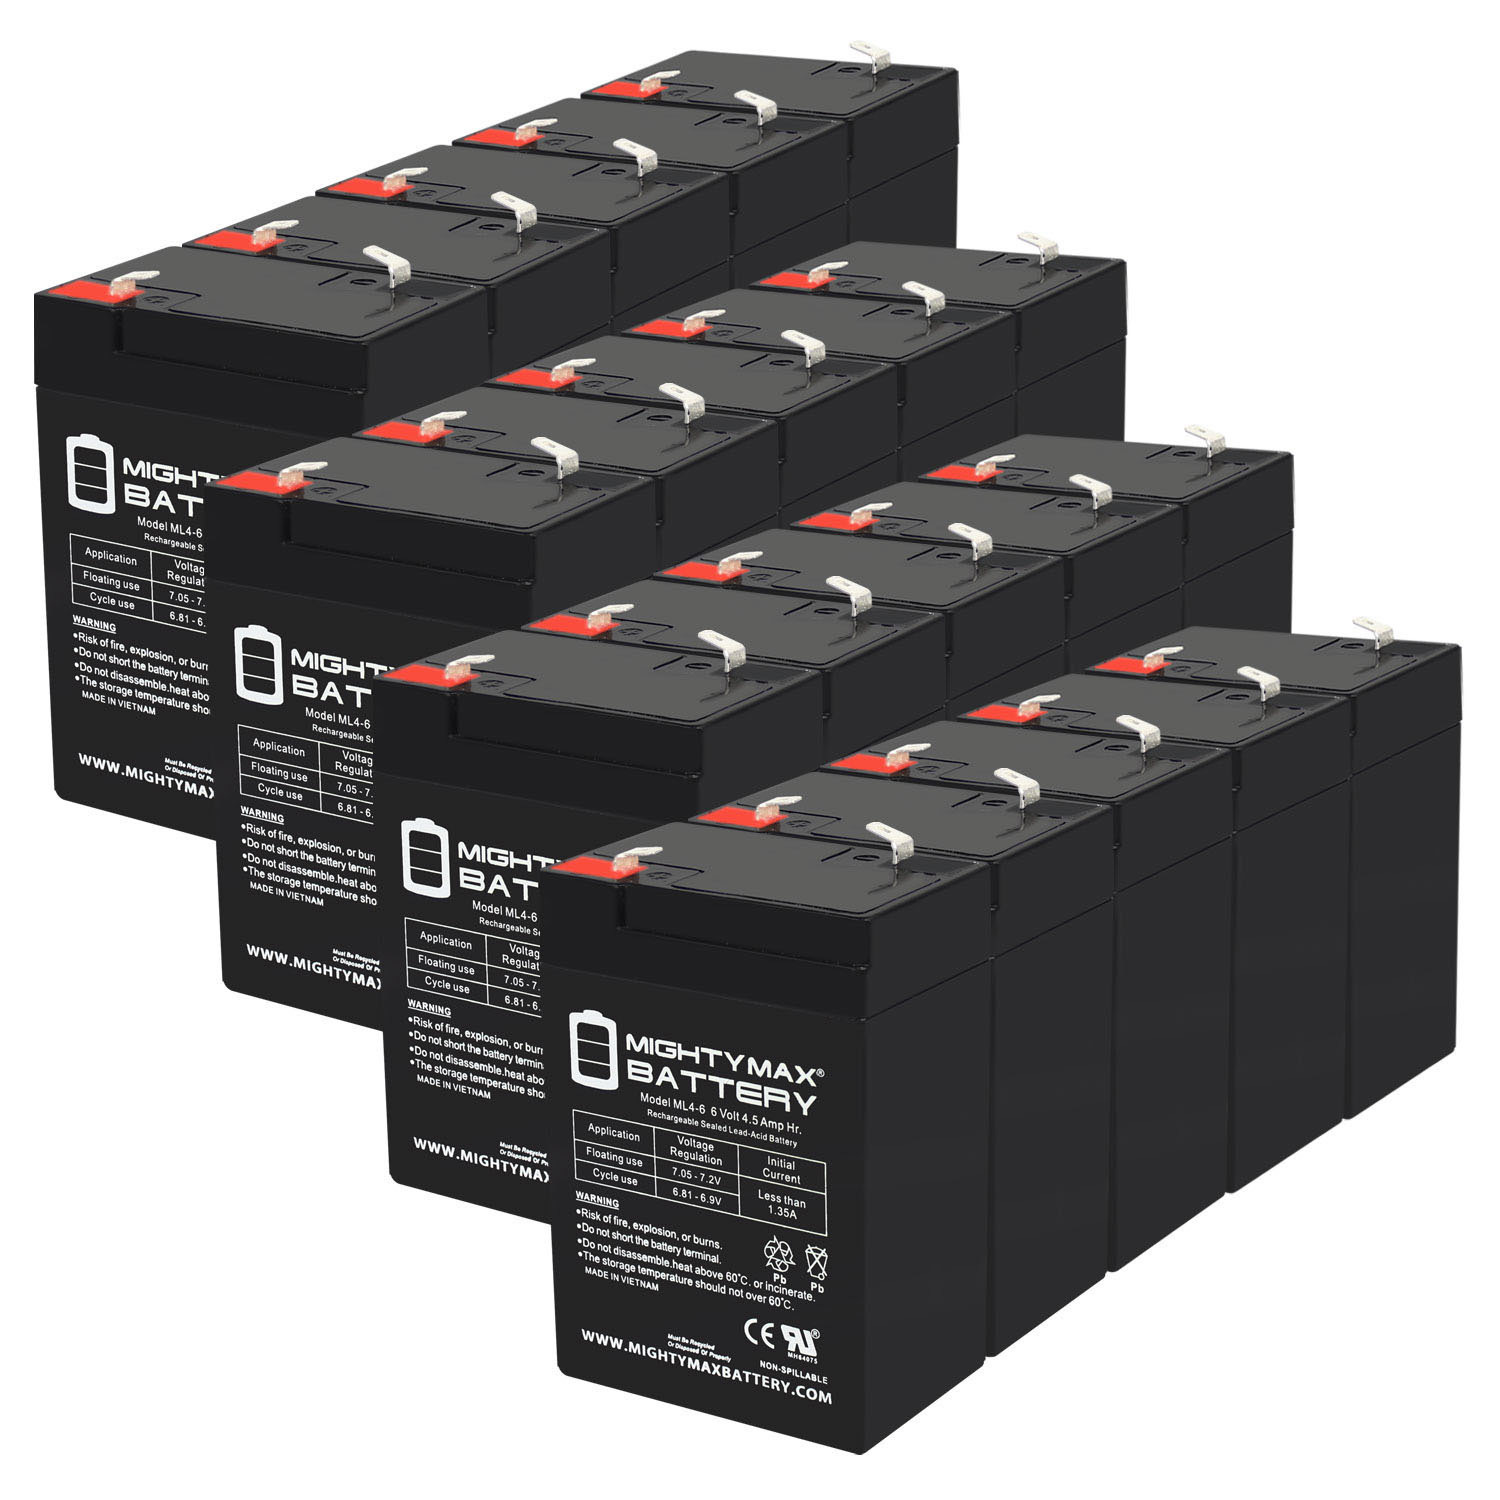 6V 4.5AH SLA Replacement Battery for Astralite EU-1 - 20 Pack